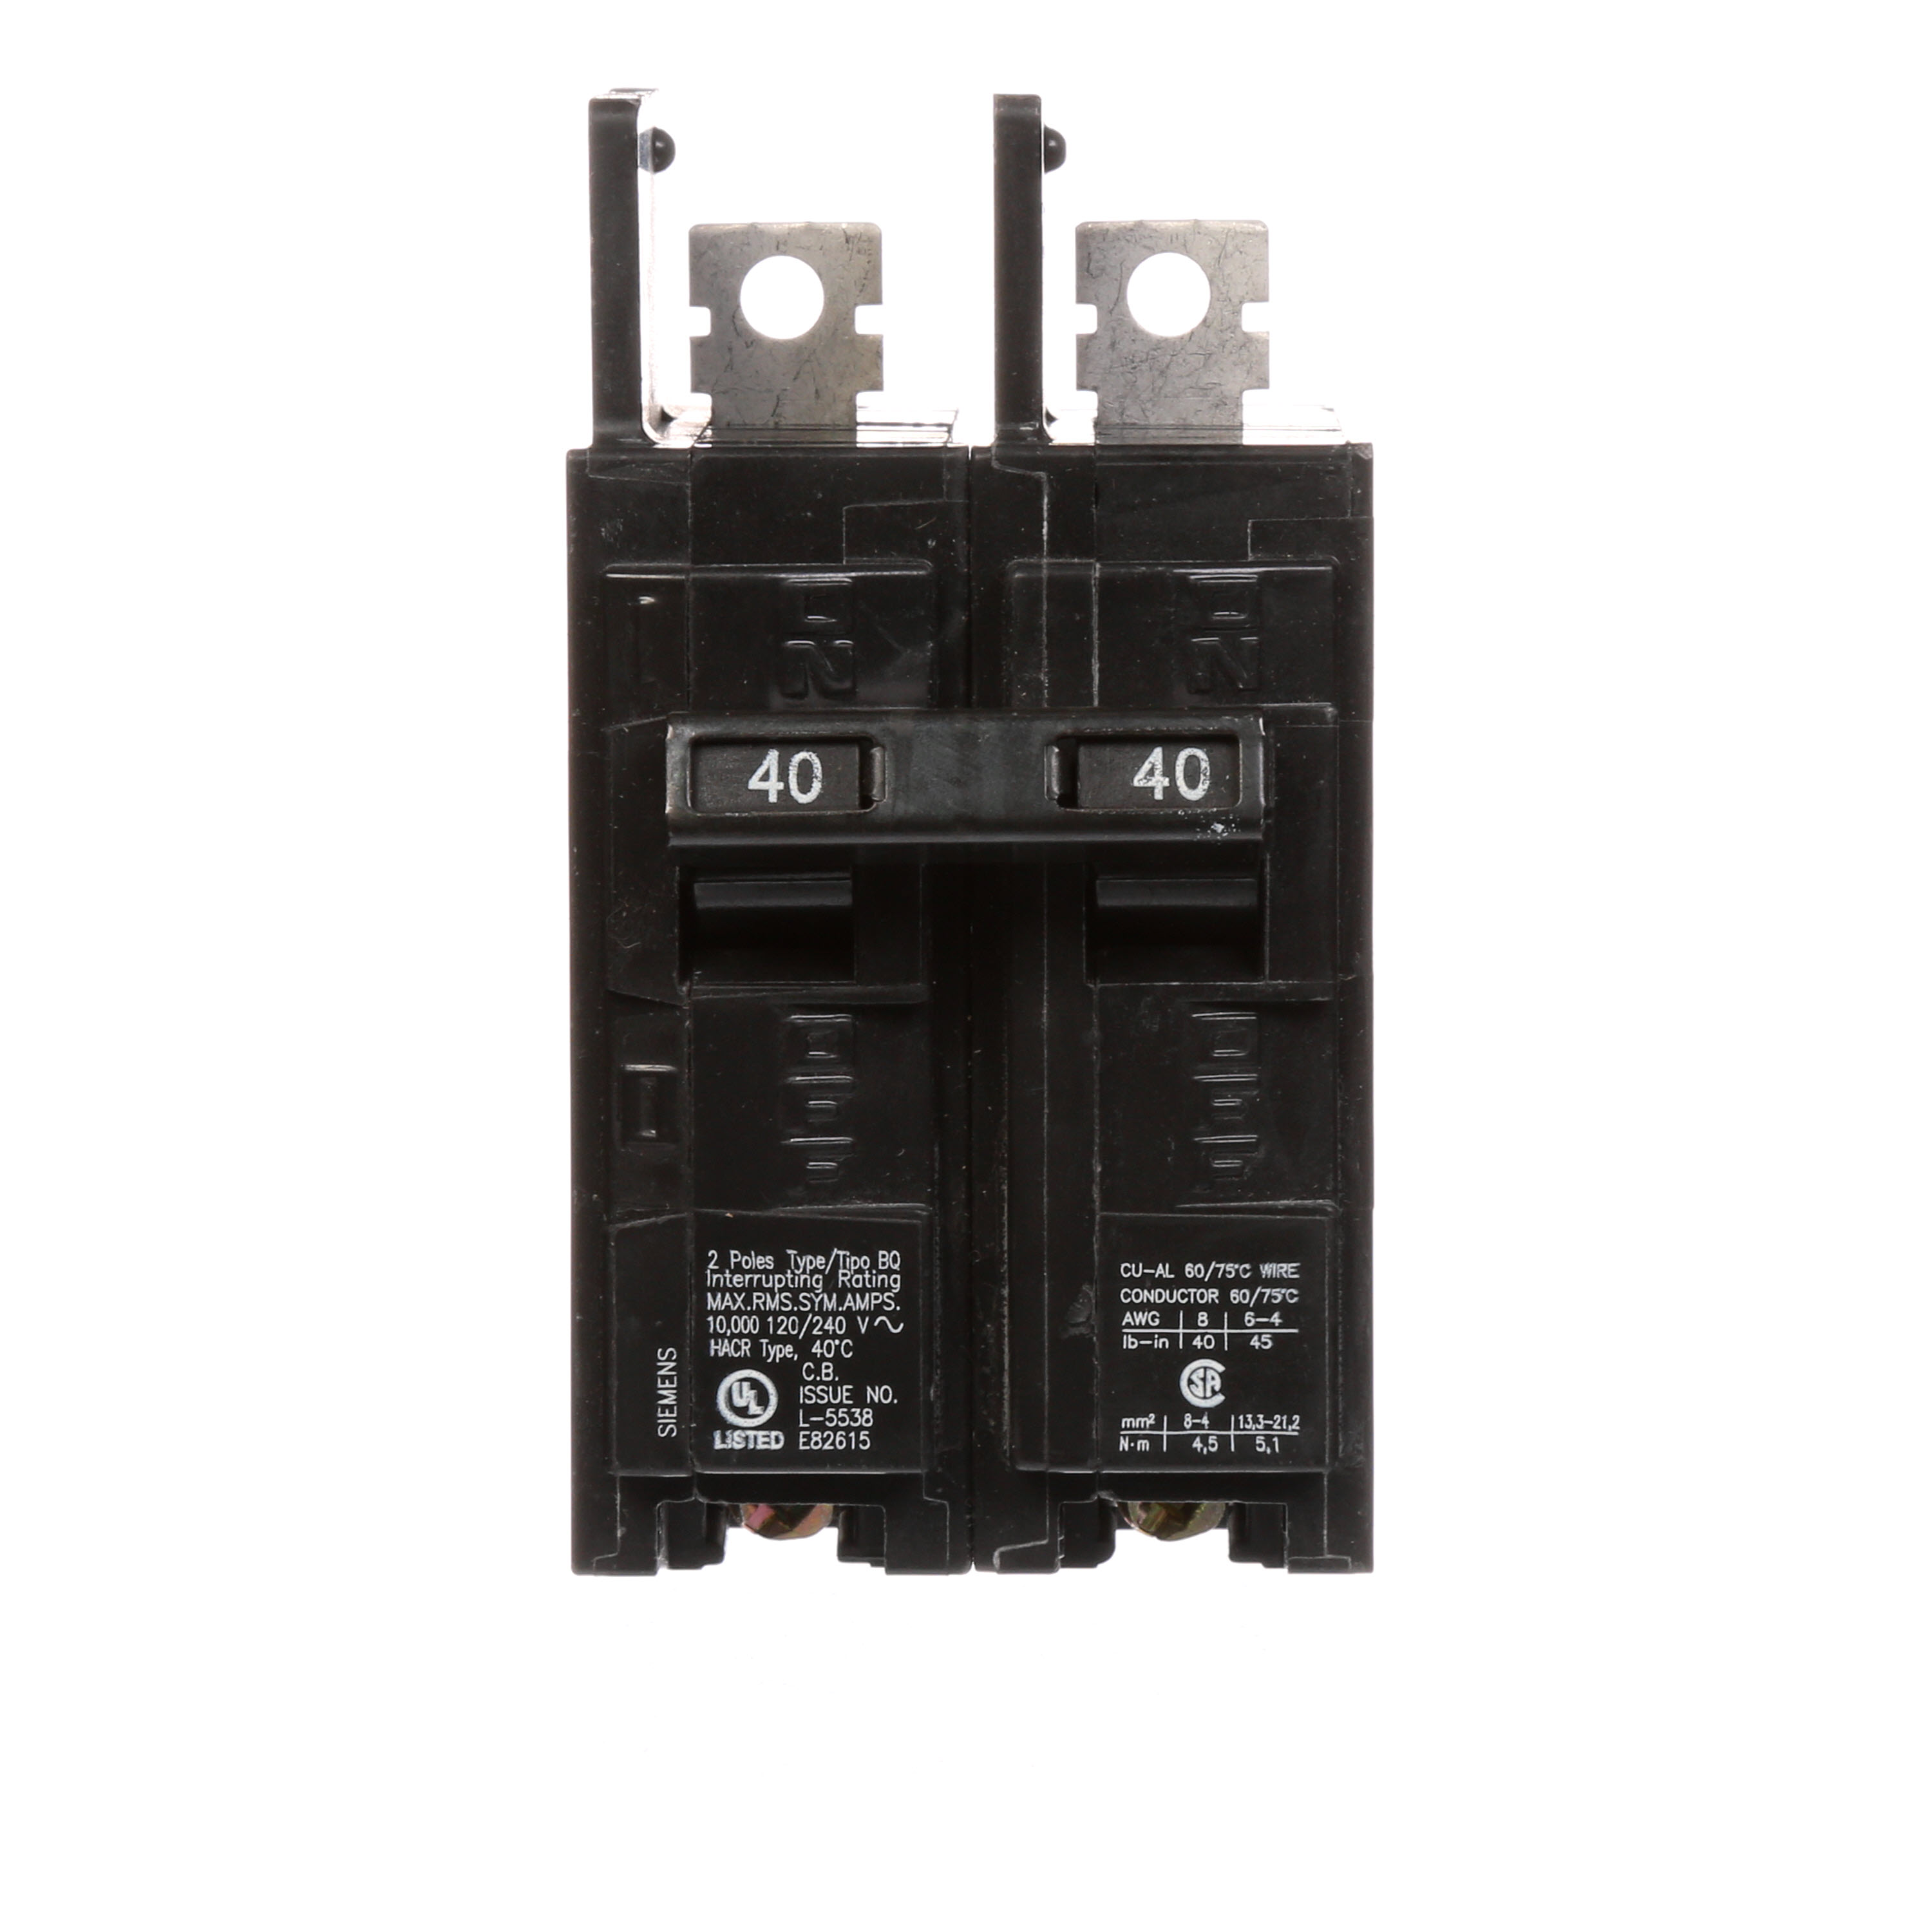 Siemens Low Voltage Molded Case Circuit Breakers General Purpose MCCBs - Type BQ, 2-Pole, 120/240VAC are Circuit Protection Molded Case Circuit Breakers. 2-Pole Common-Trip circuit breaker type BQ. Rated 120/240V (040A) (AIR 10 kA). Special features Load side lugs are included.